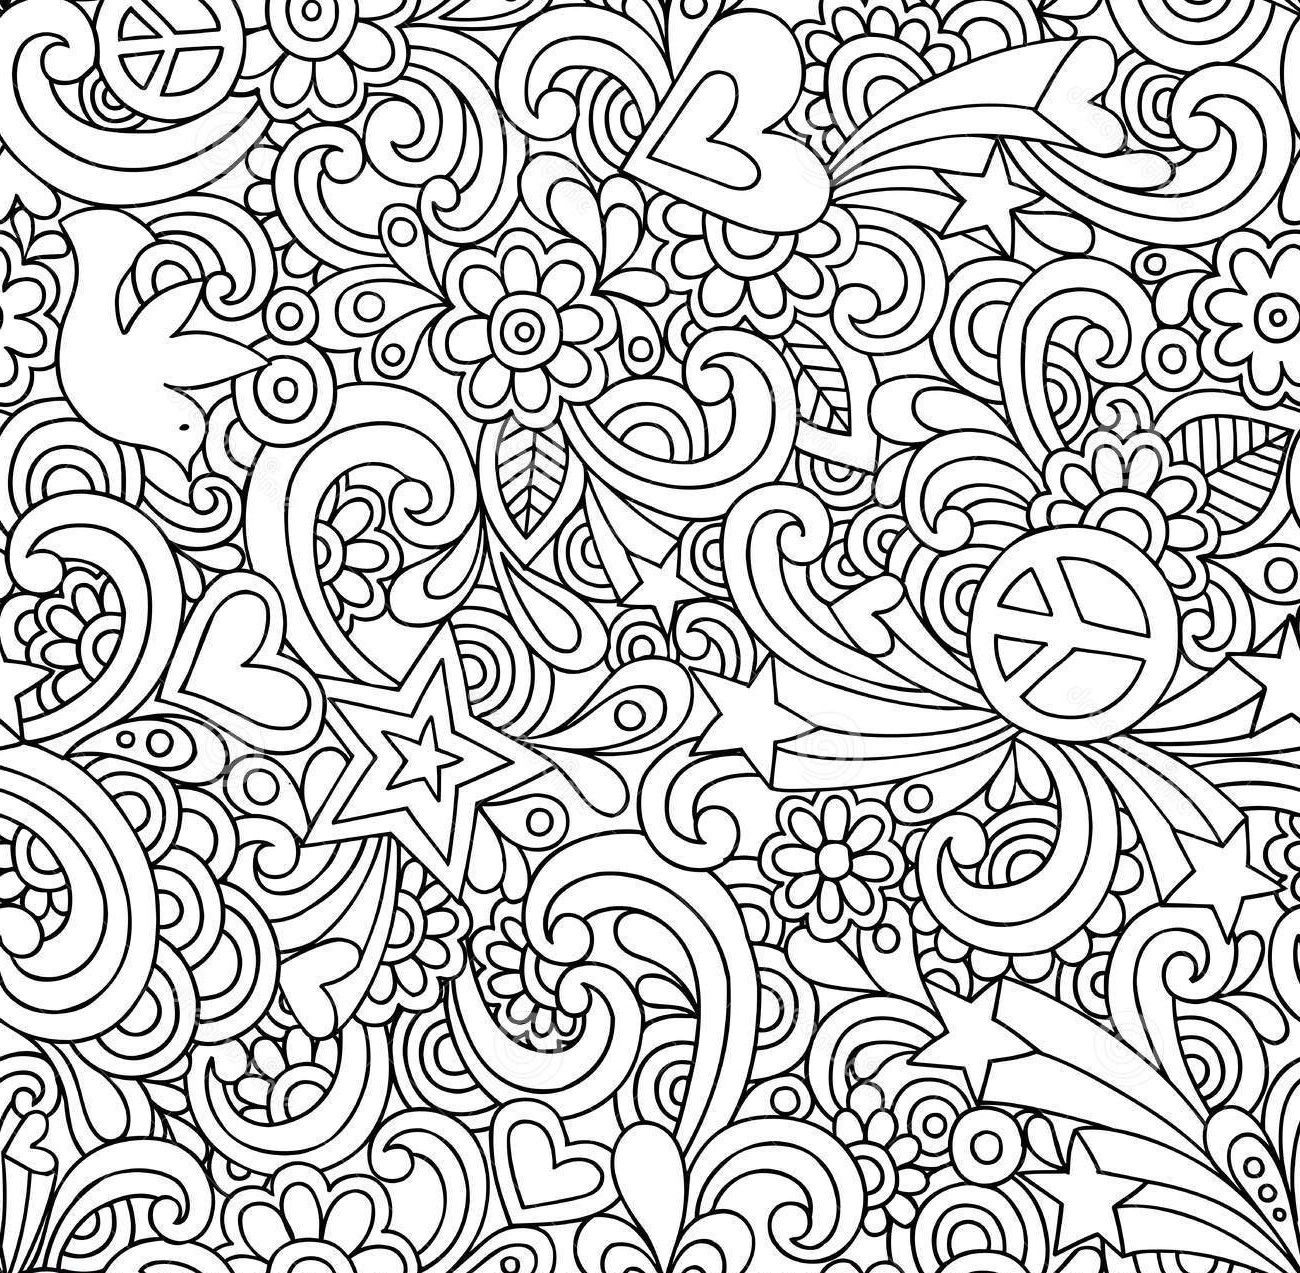 Coloring: Abstract Coloring Pages For Adults To Print